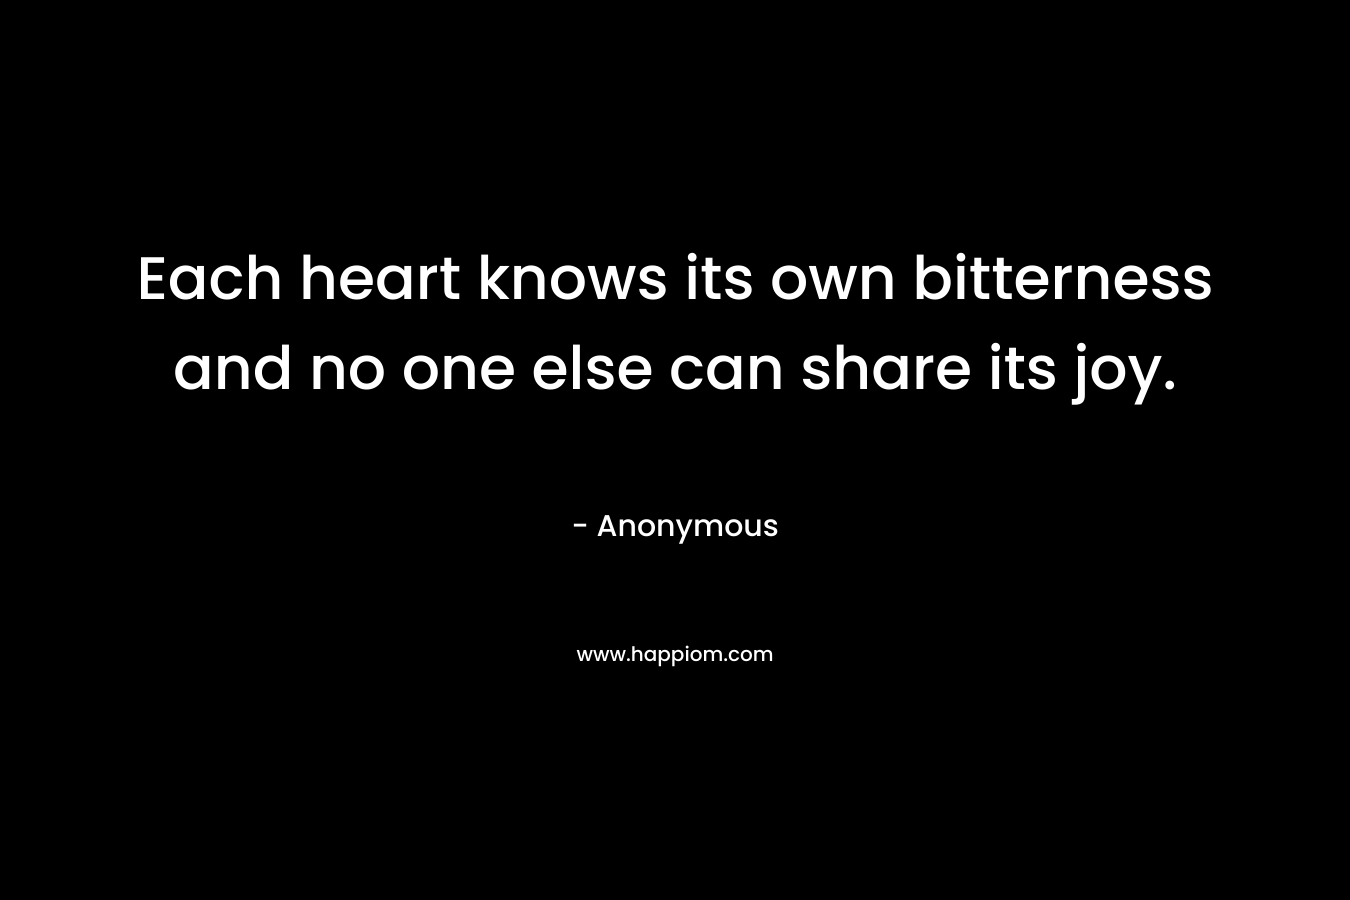 Each heart knows its own bitterness and no one else can share its joy.